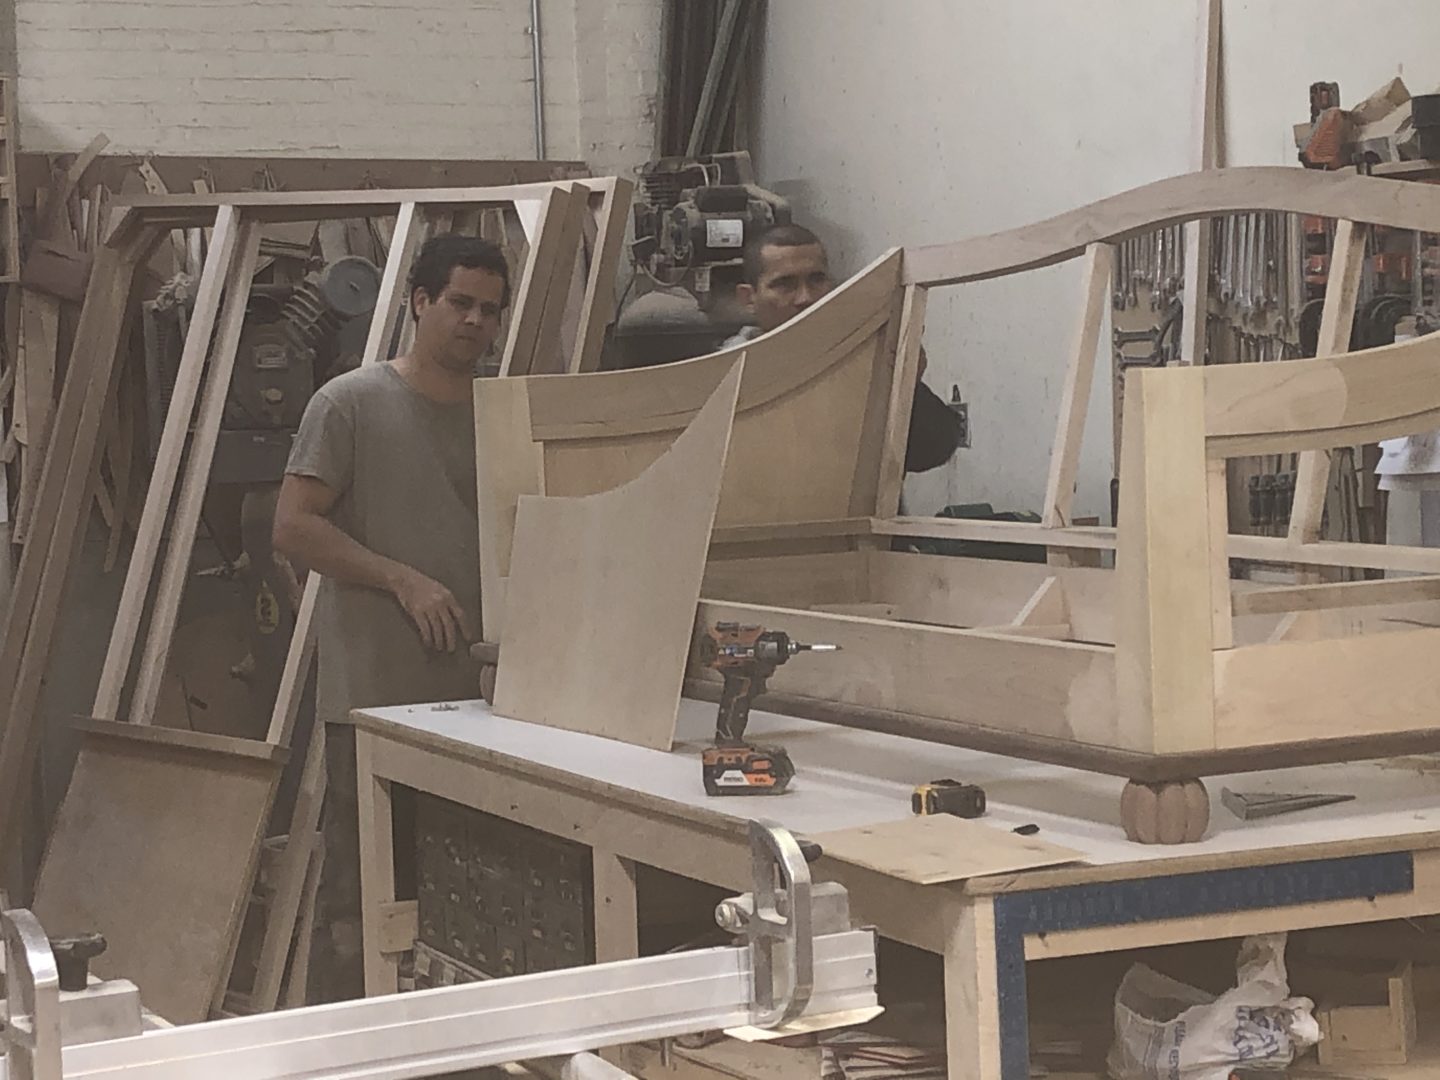 A man working with plywood